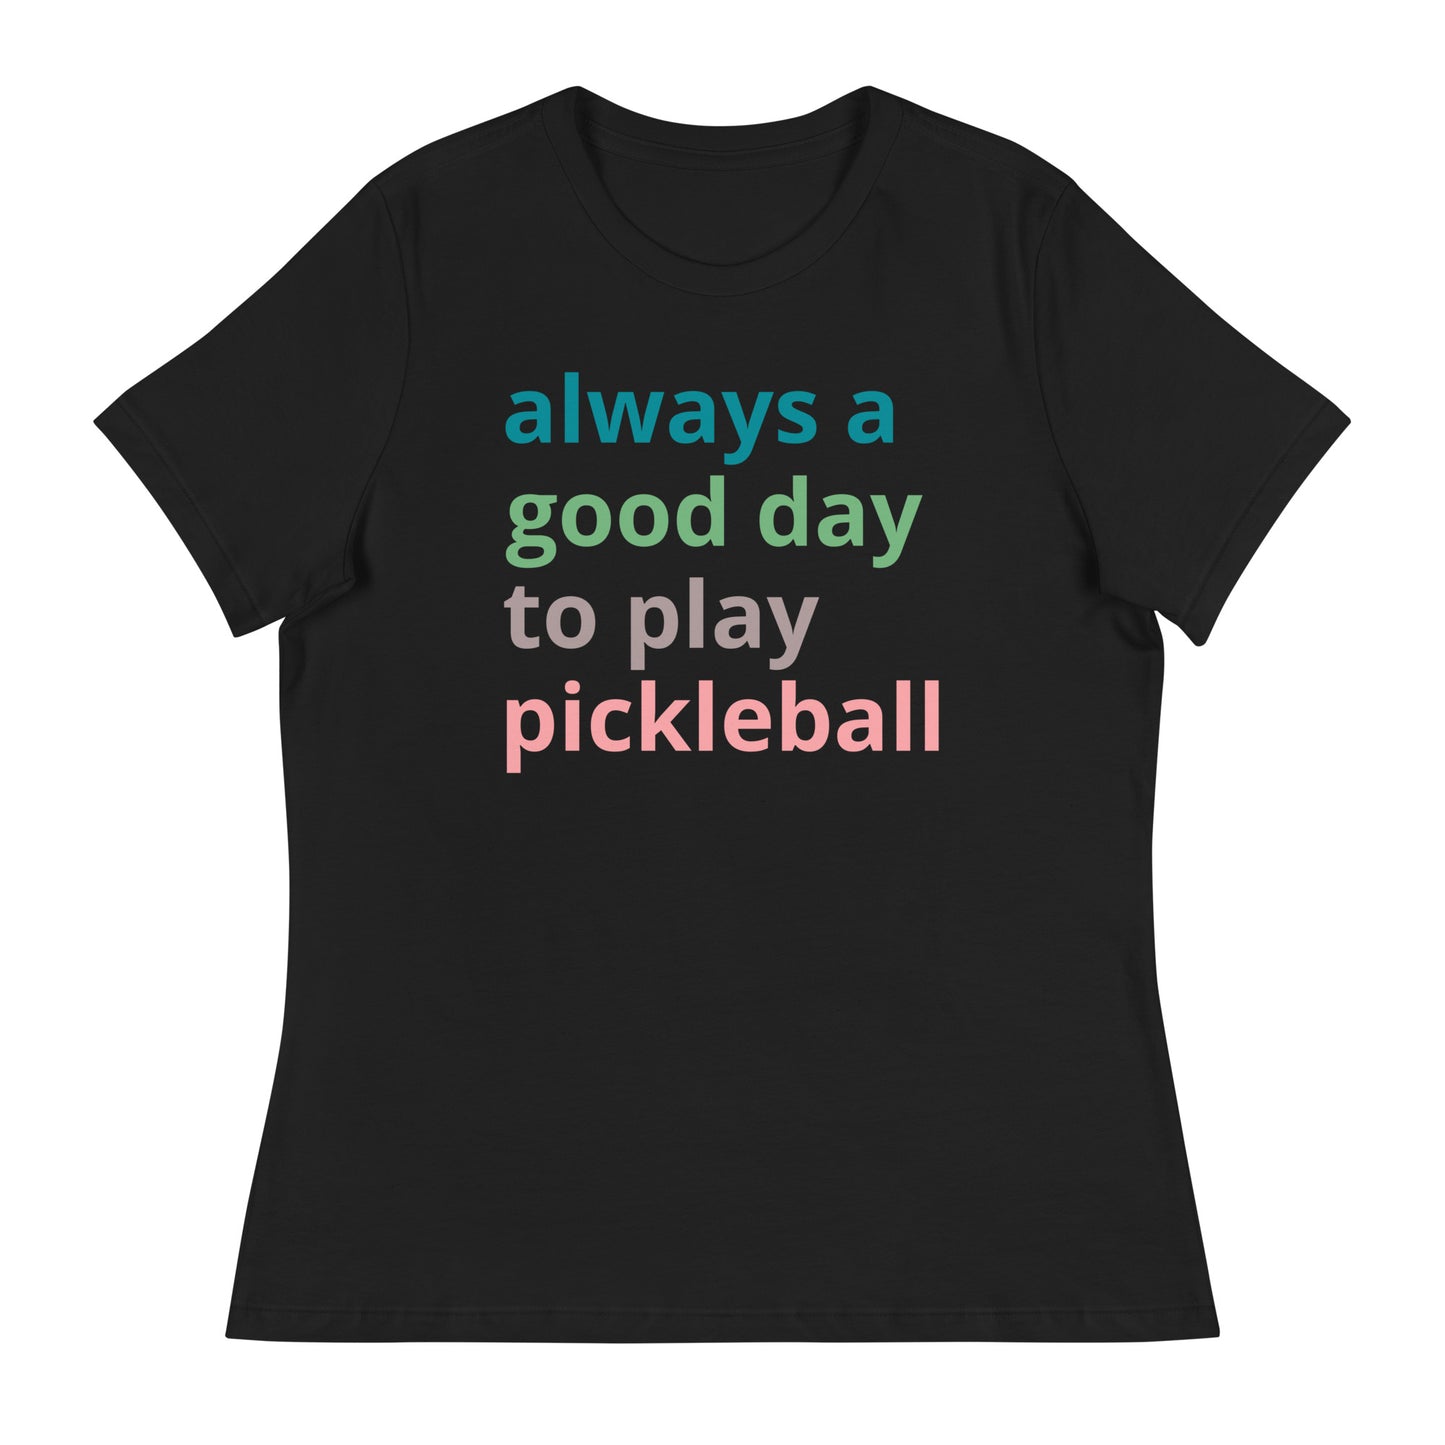 Good day to play pickleball - Women's Relaxed T-Shirt